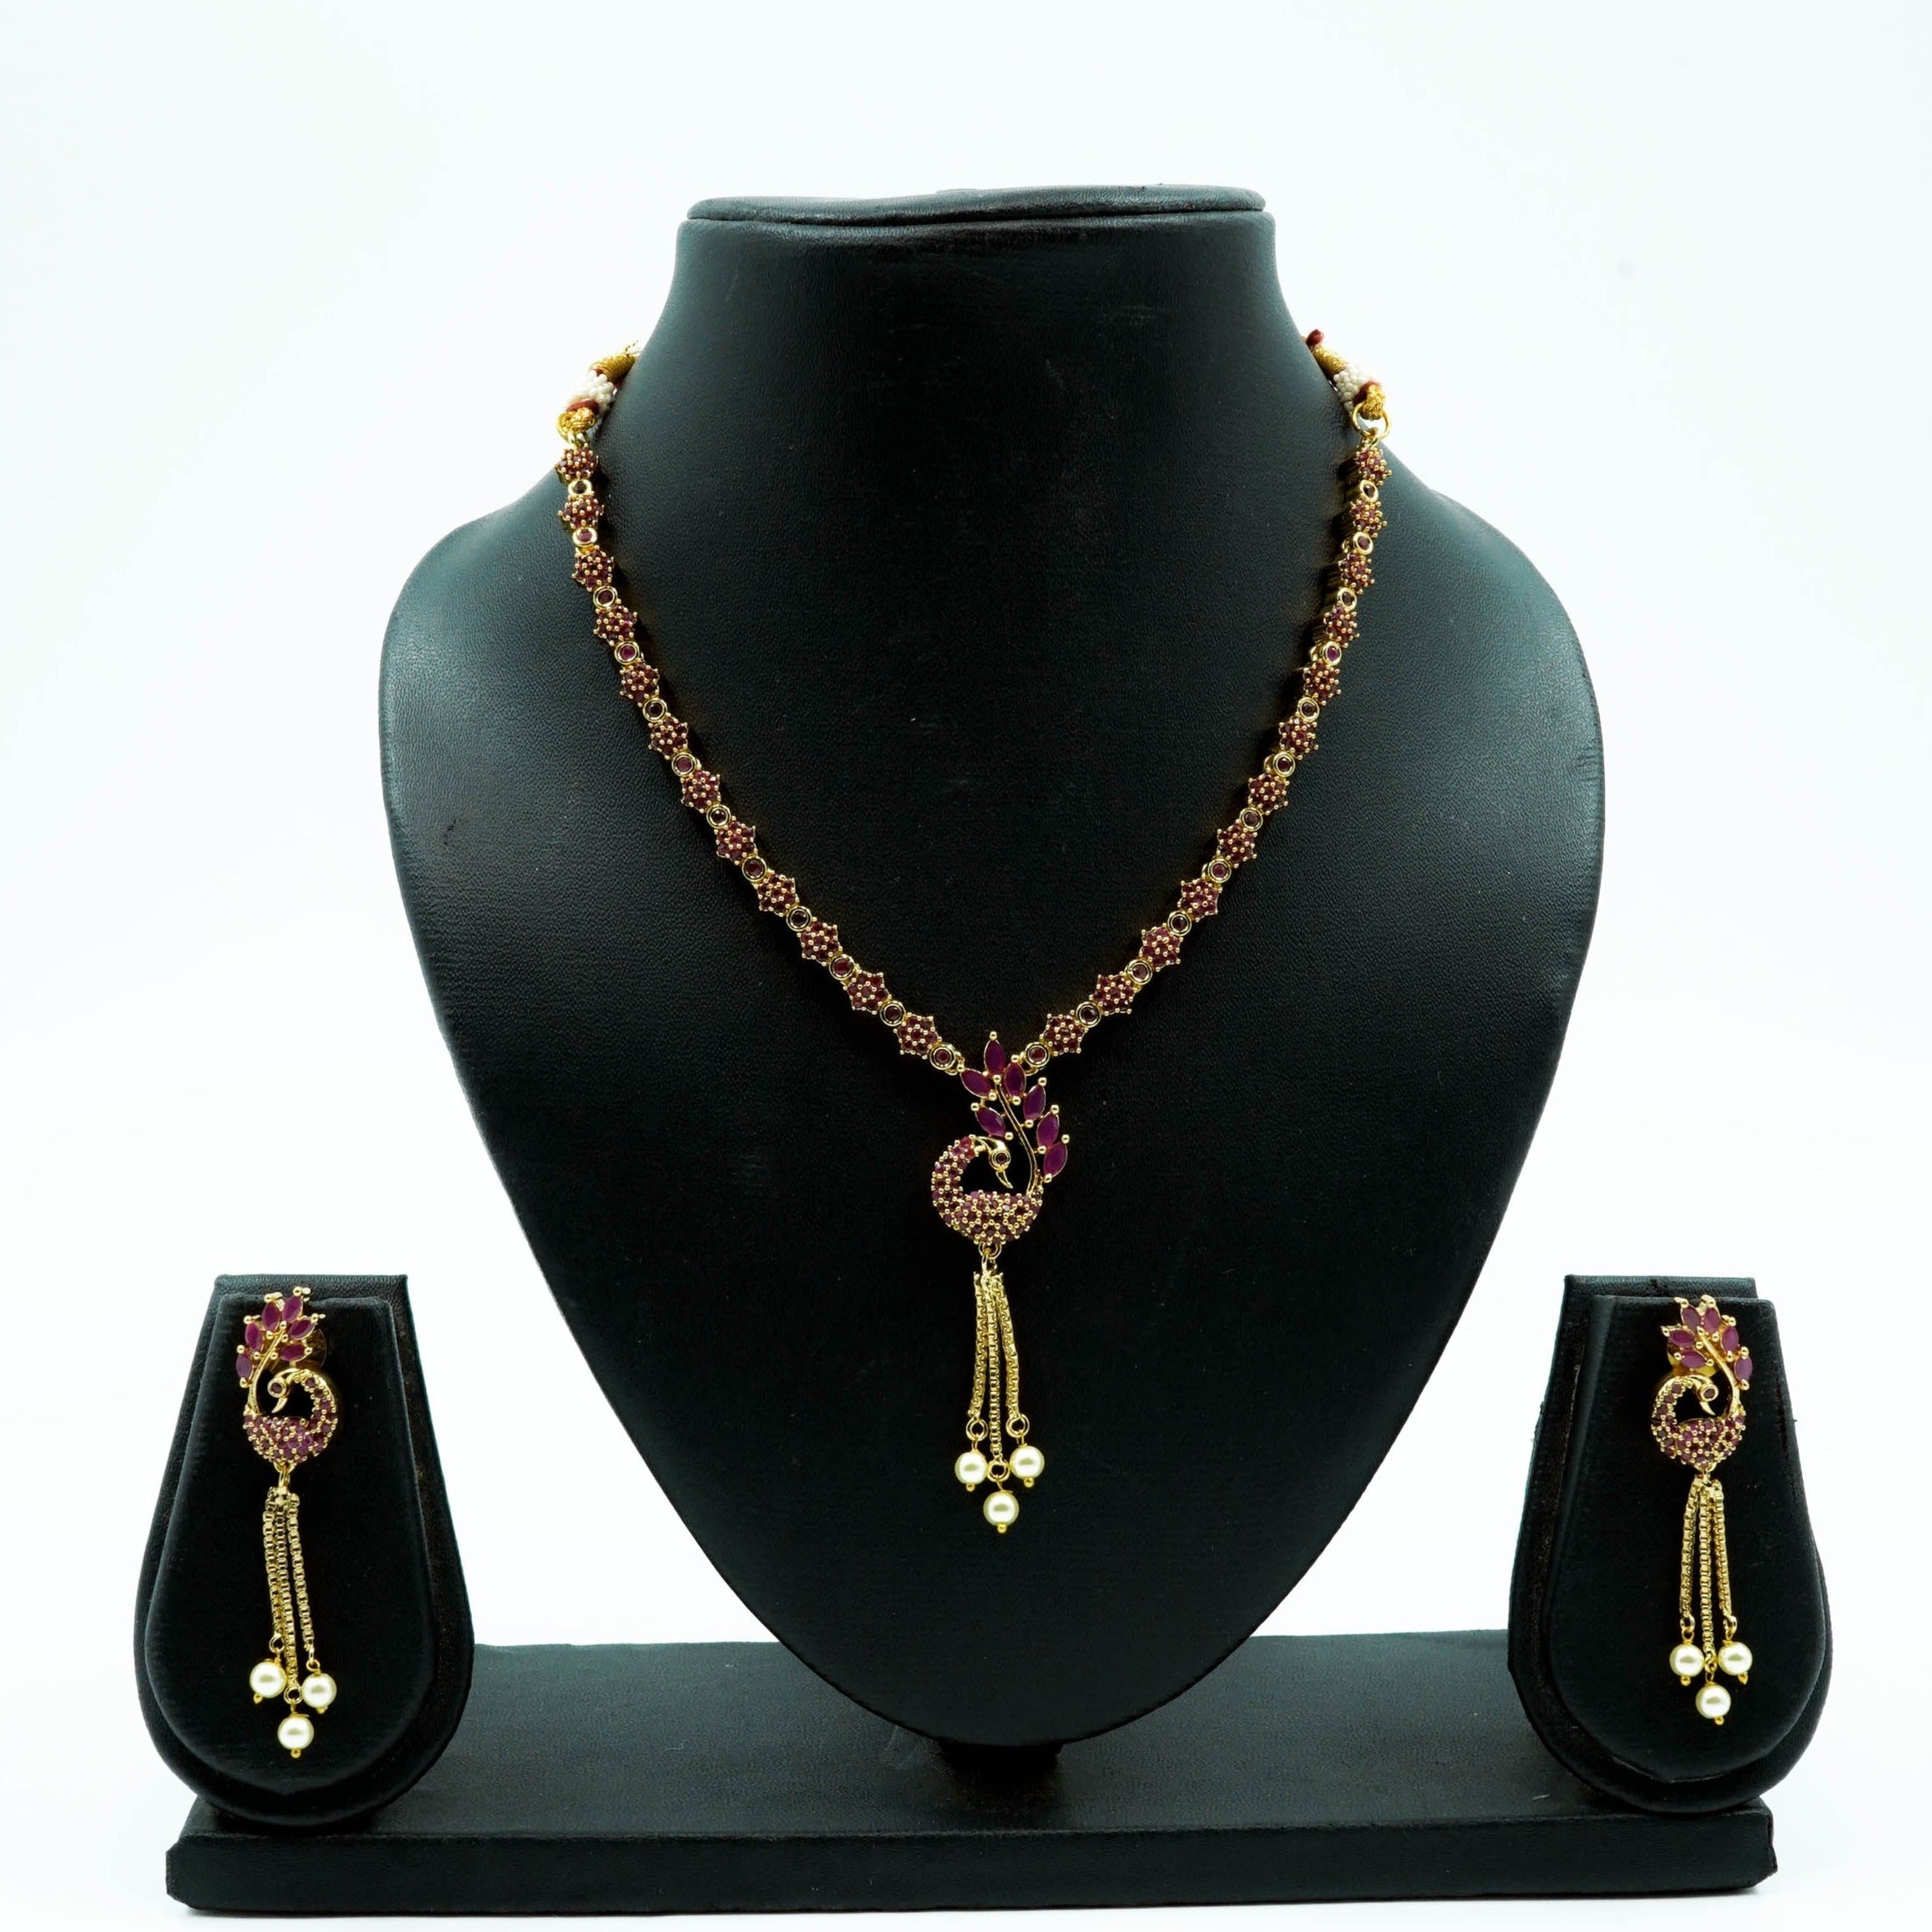 Premium Quality Micro Gold finish Necklace set with High Quality AD Stones Peacock 9513N